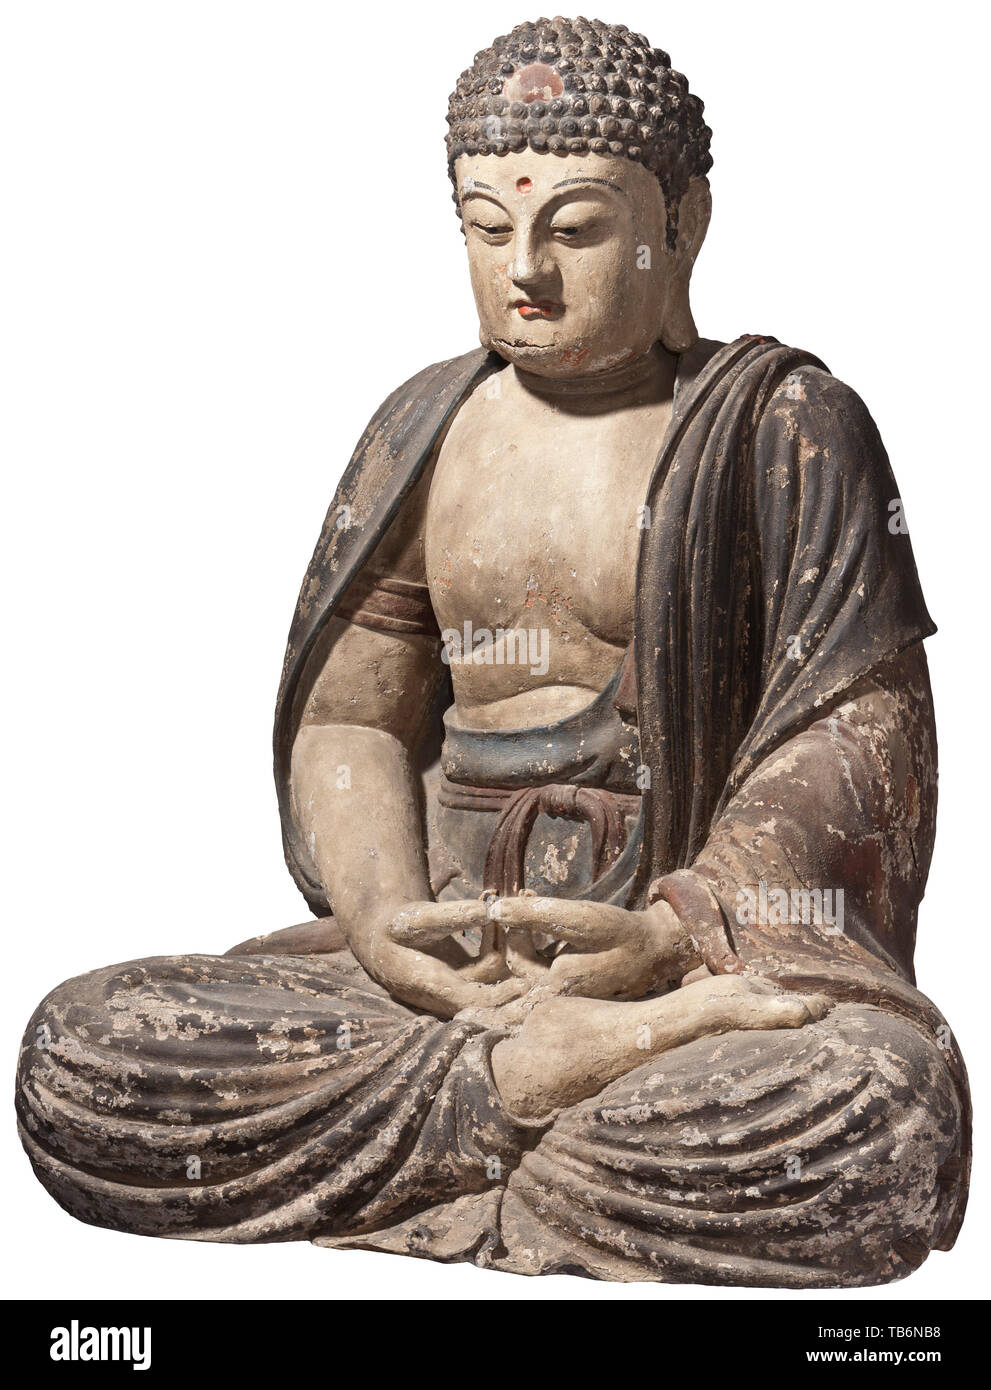 A North Chinese figure of Buddha Amitabha, probably 14th century, Life-size  figure of the meditating Buddha of wood with fragmentarily preserved  polychrome painted exterior (partially cracked and damaged), his hair  arranged in